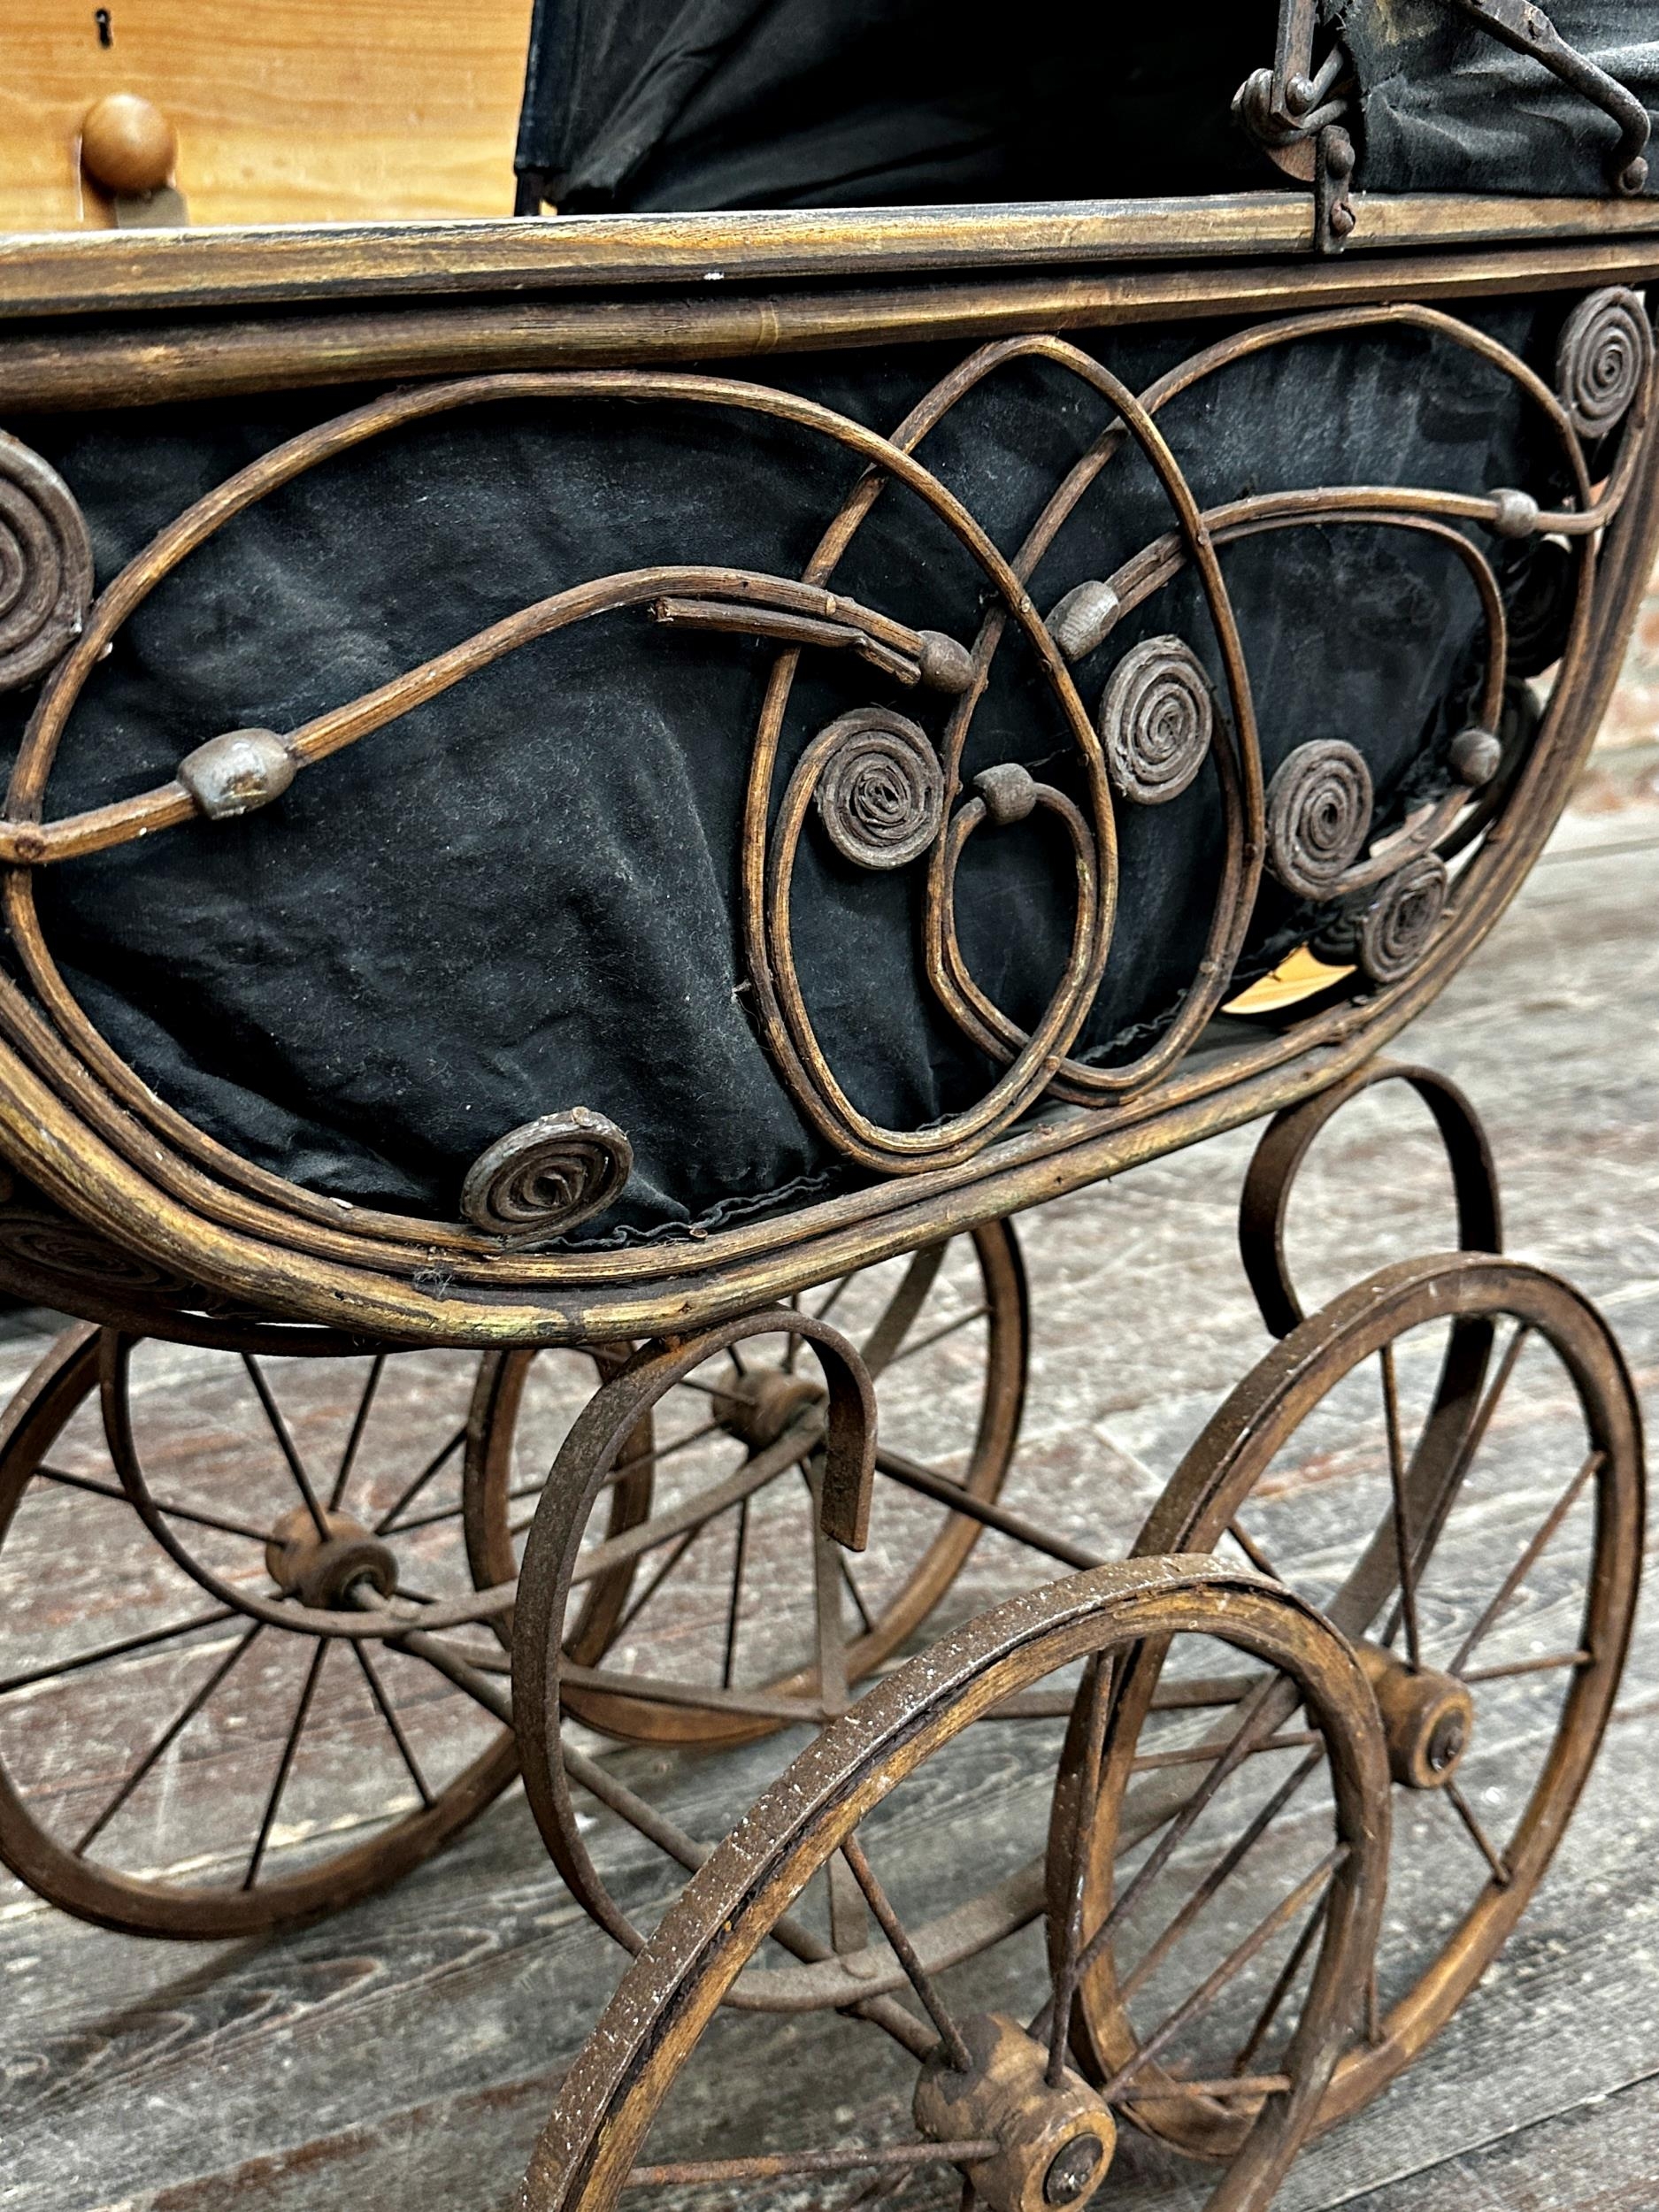 Antique wicker pram with pierced scrolling detail and fabric hood, 88cm high - Image 3 of 3